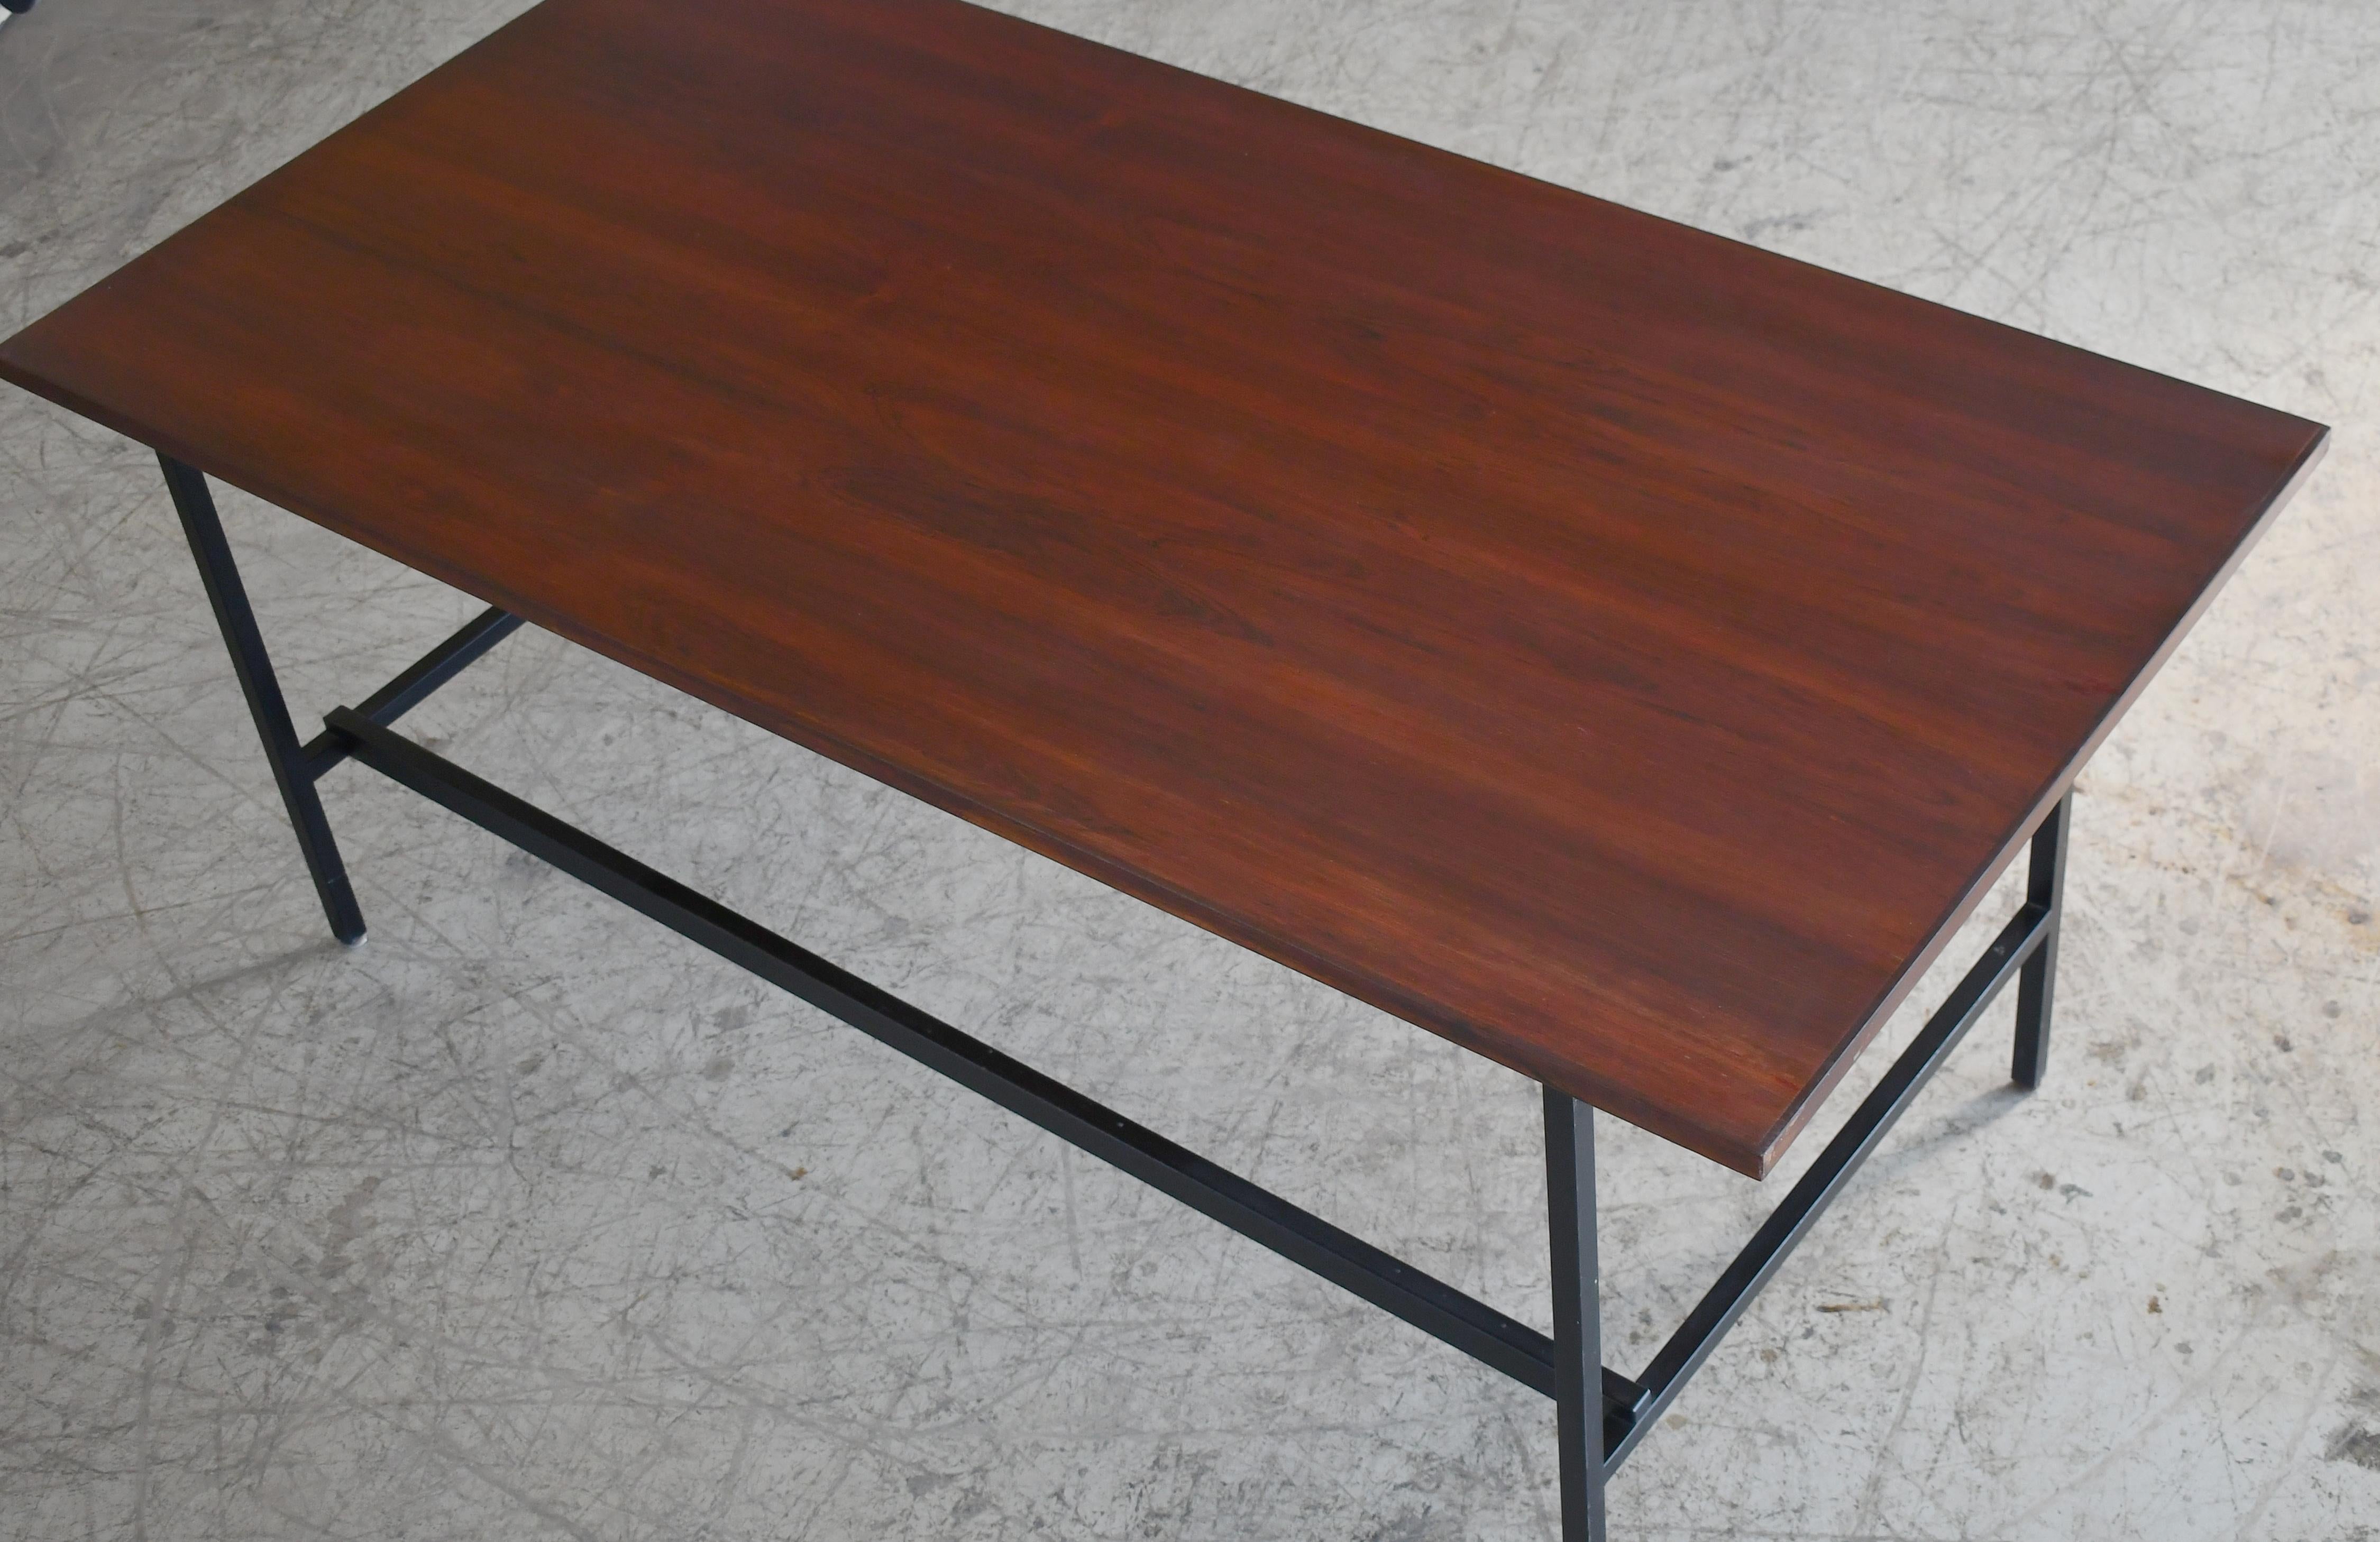 Beautiful large Danish modern executive desk with metal base made probably around the late 1960's in Denmark. Unmarked and we are not sure of the Designer nor Maker. Great large working space providing a large work surface to spread out and get